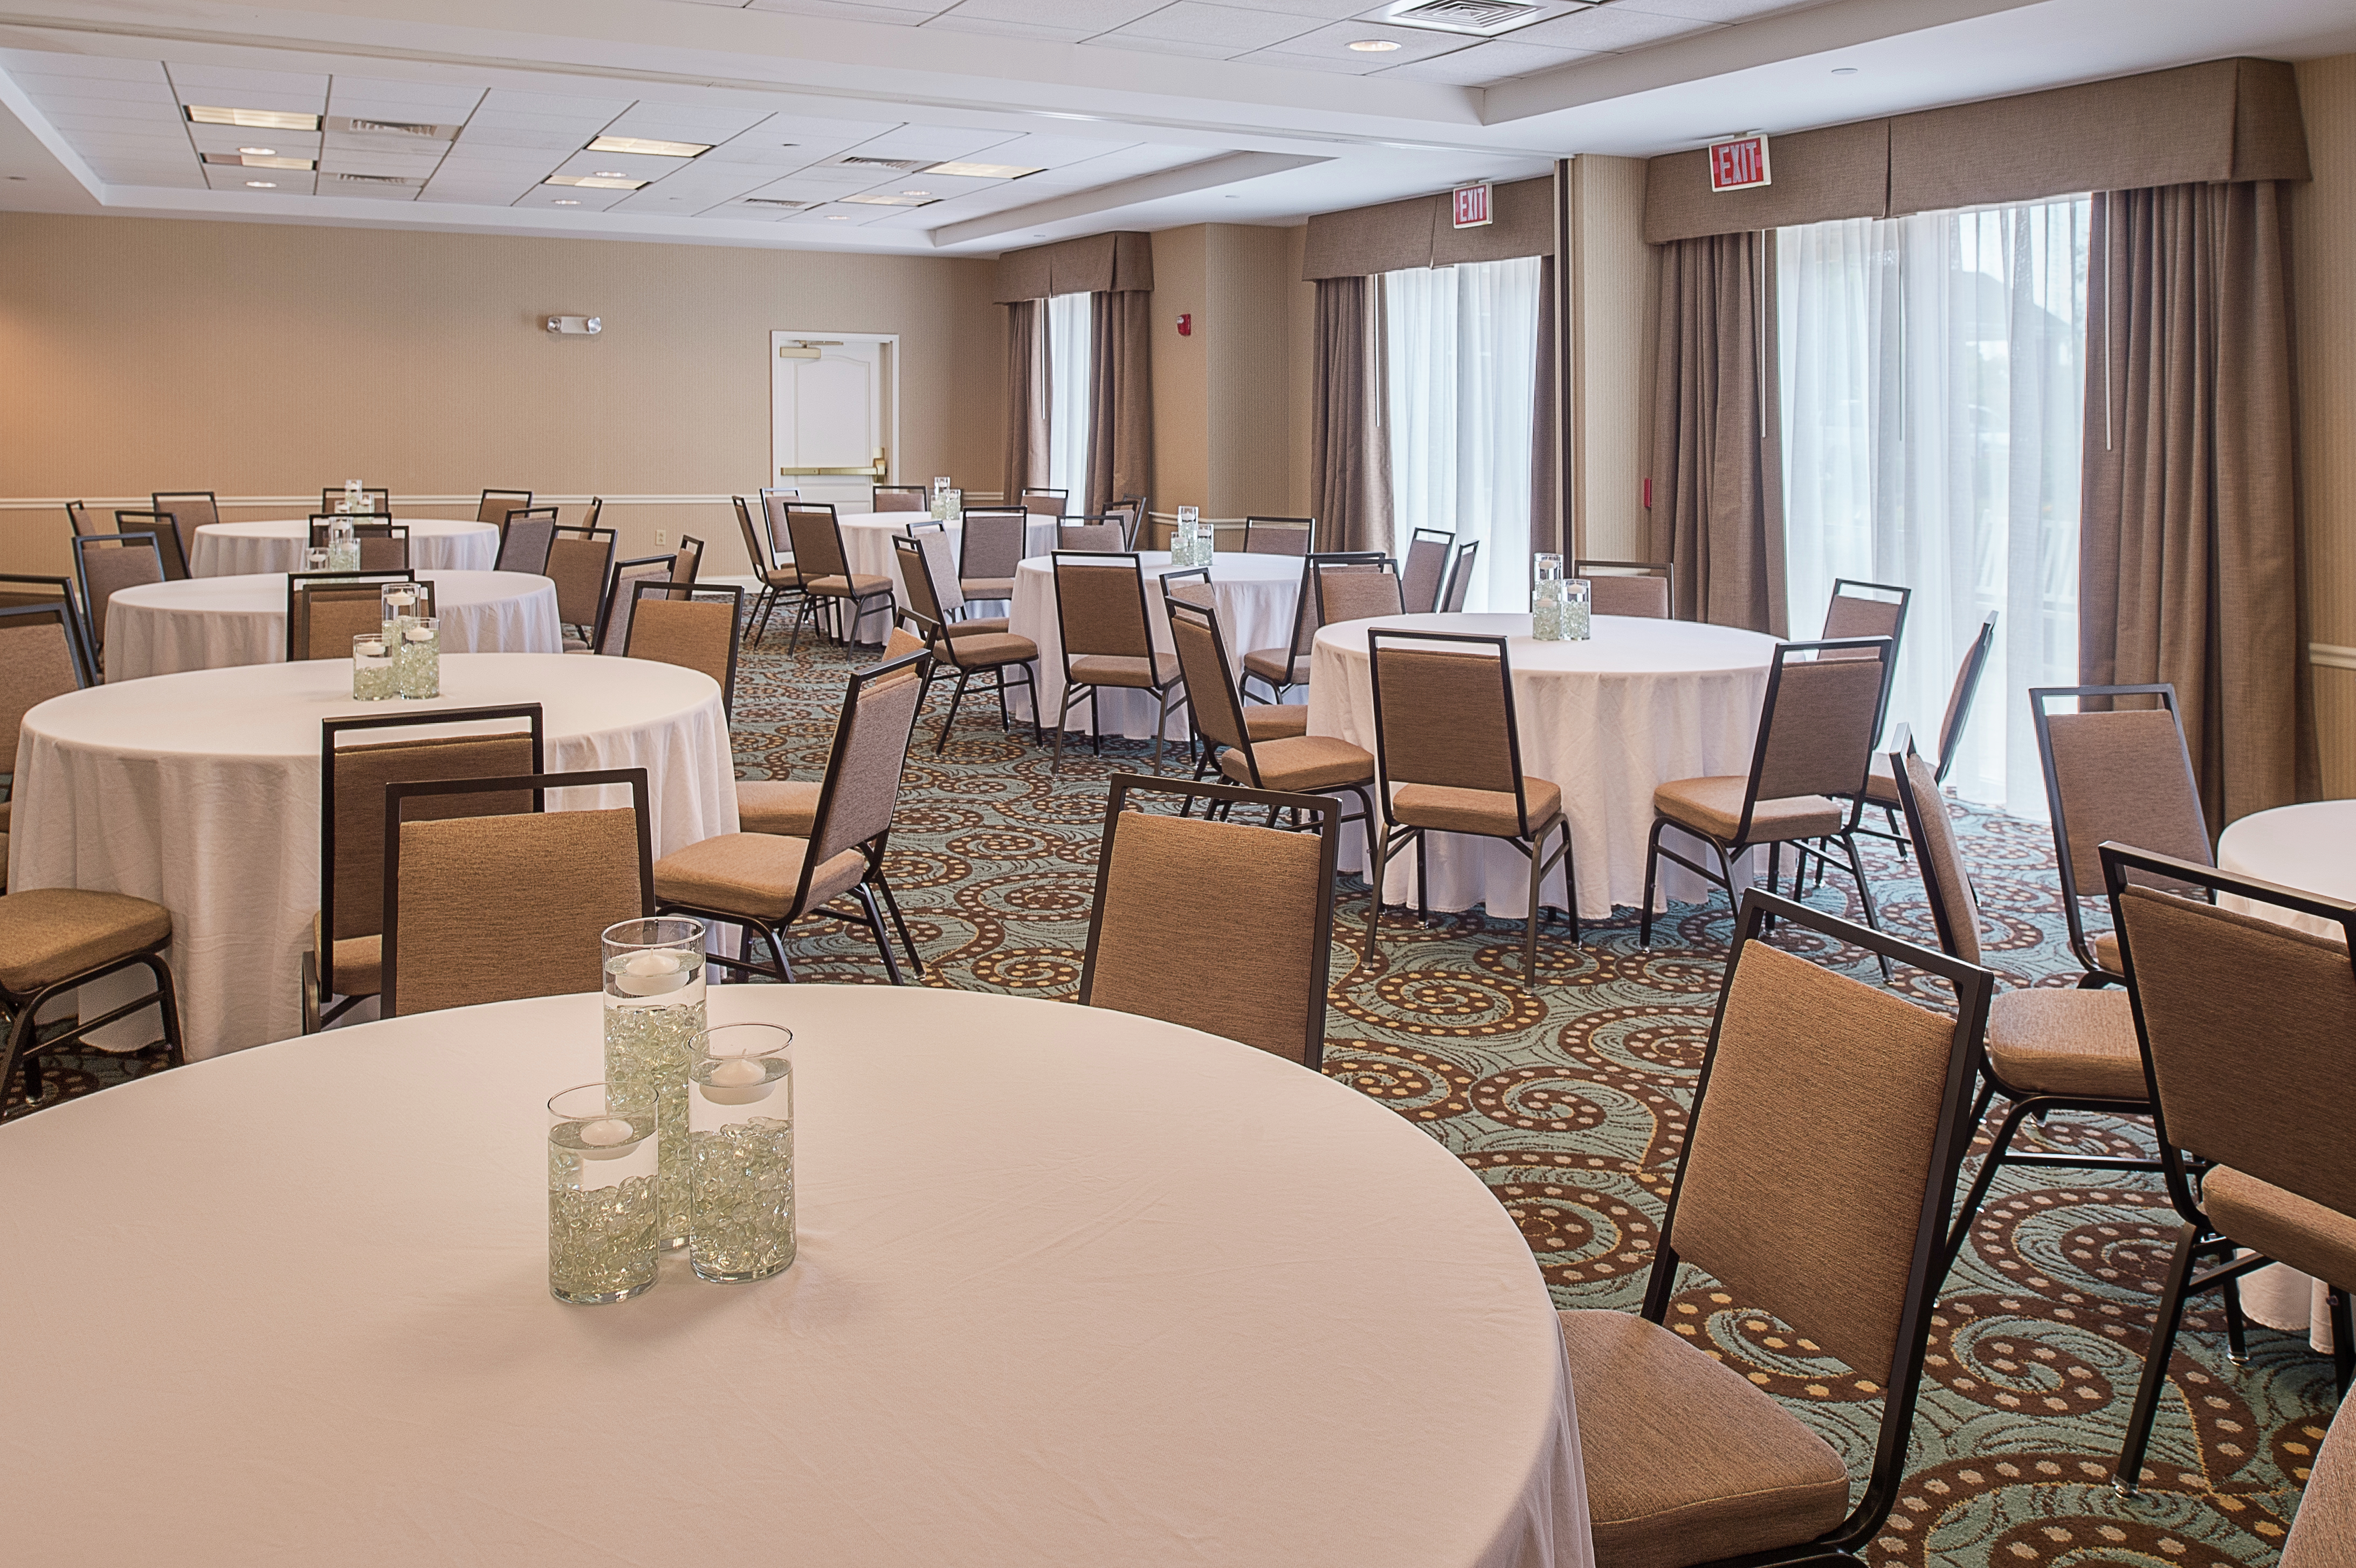 Tan Chairs at Round Tables With Candles on White Linens and Windows With Long Drapes in Meeting Space